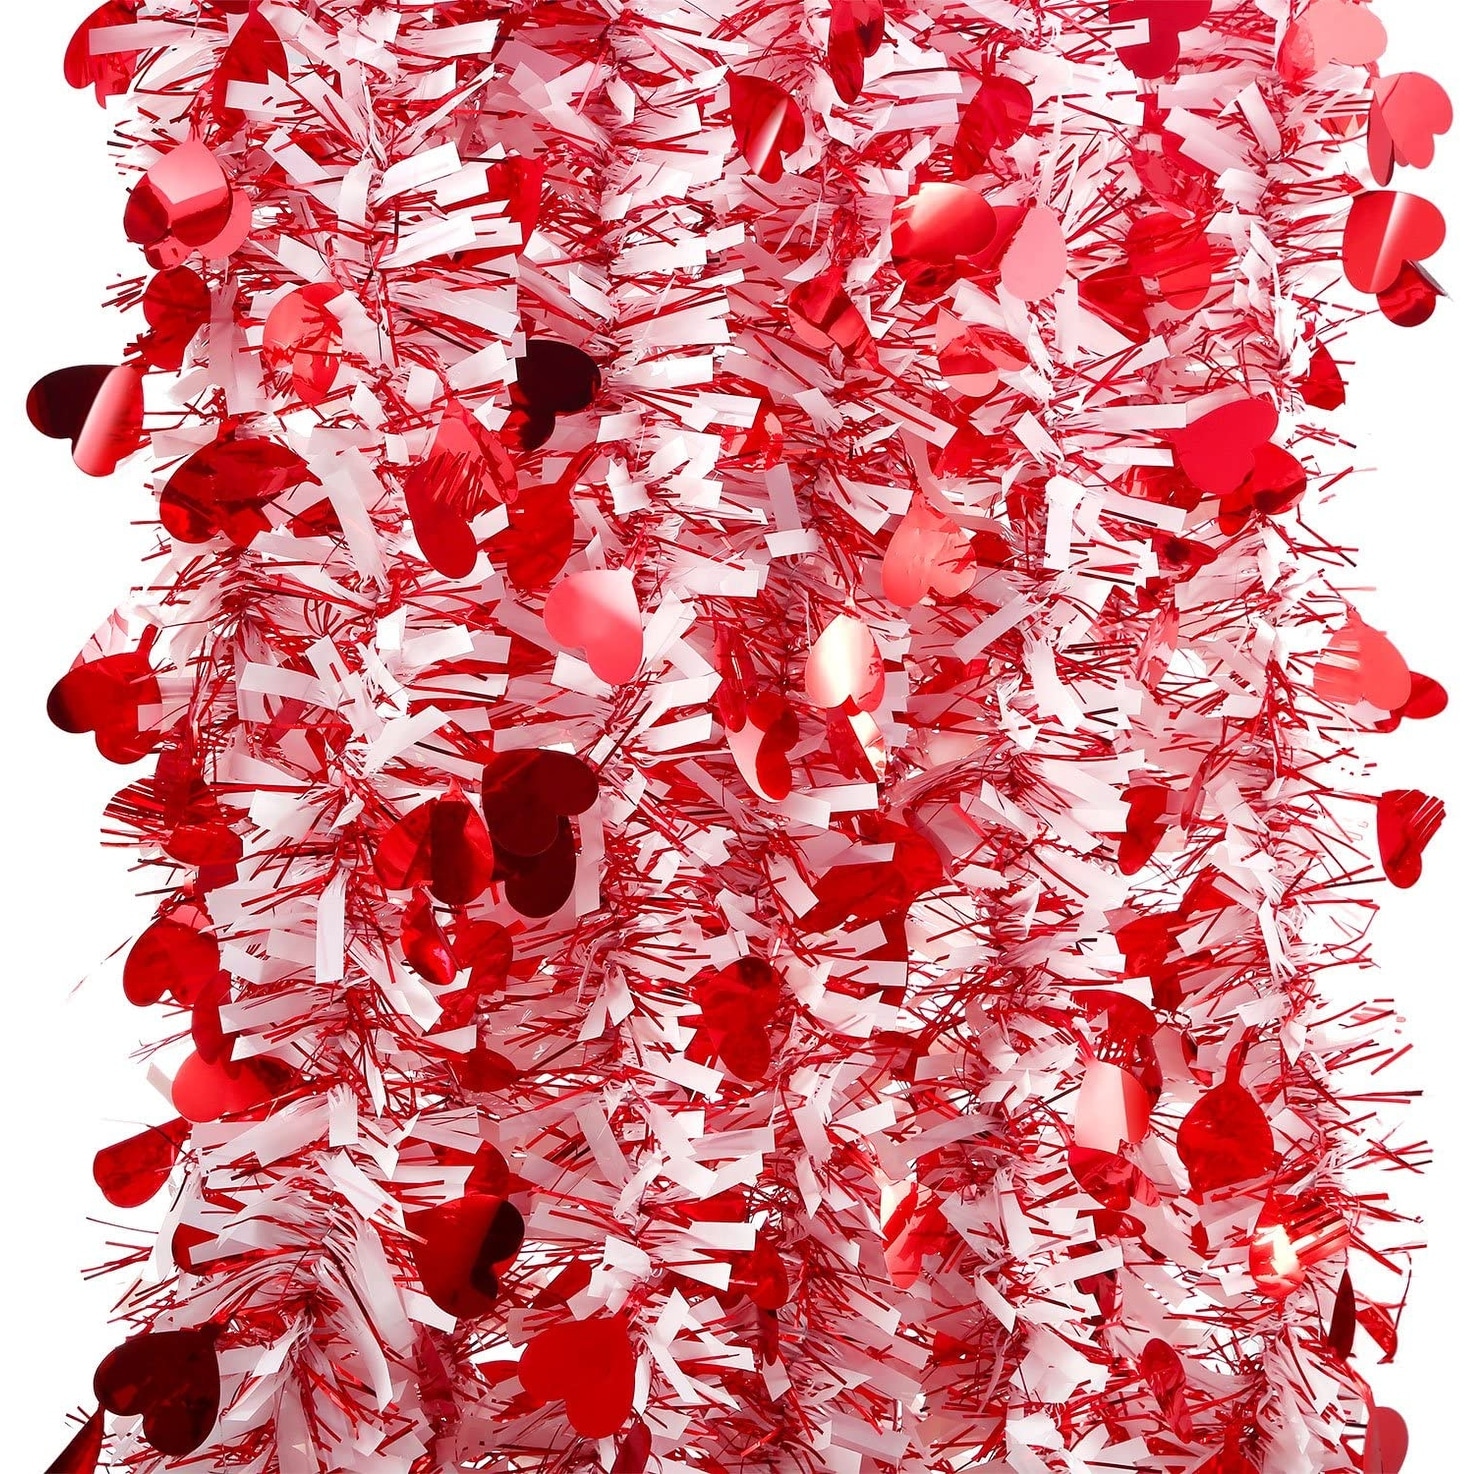 CCINEE 33FT Valentines Day Tinsel Garland,Red Heart Metallic Garland Decor for Wedding Party Hanging Decoration Supply